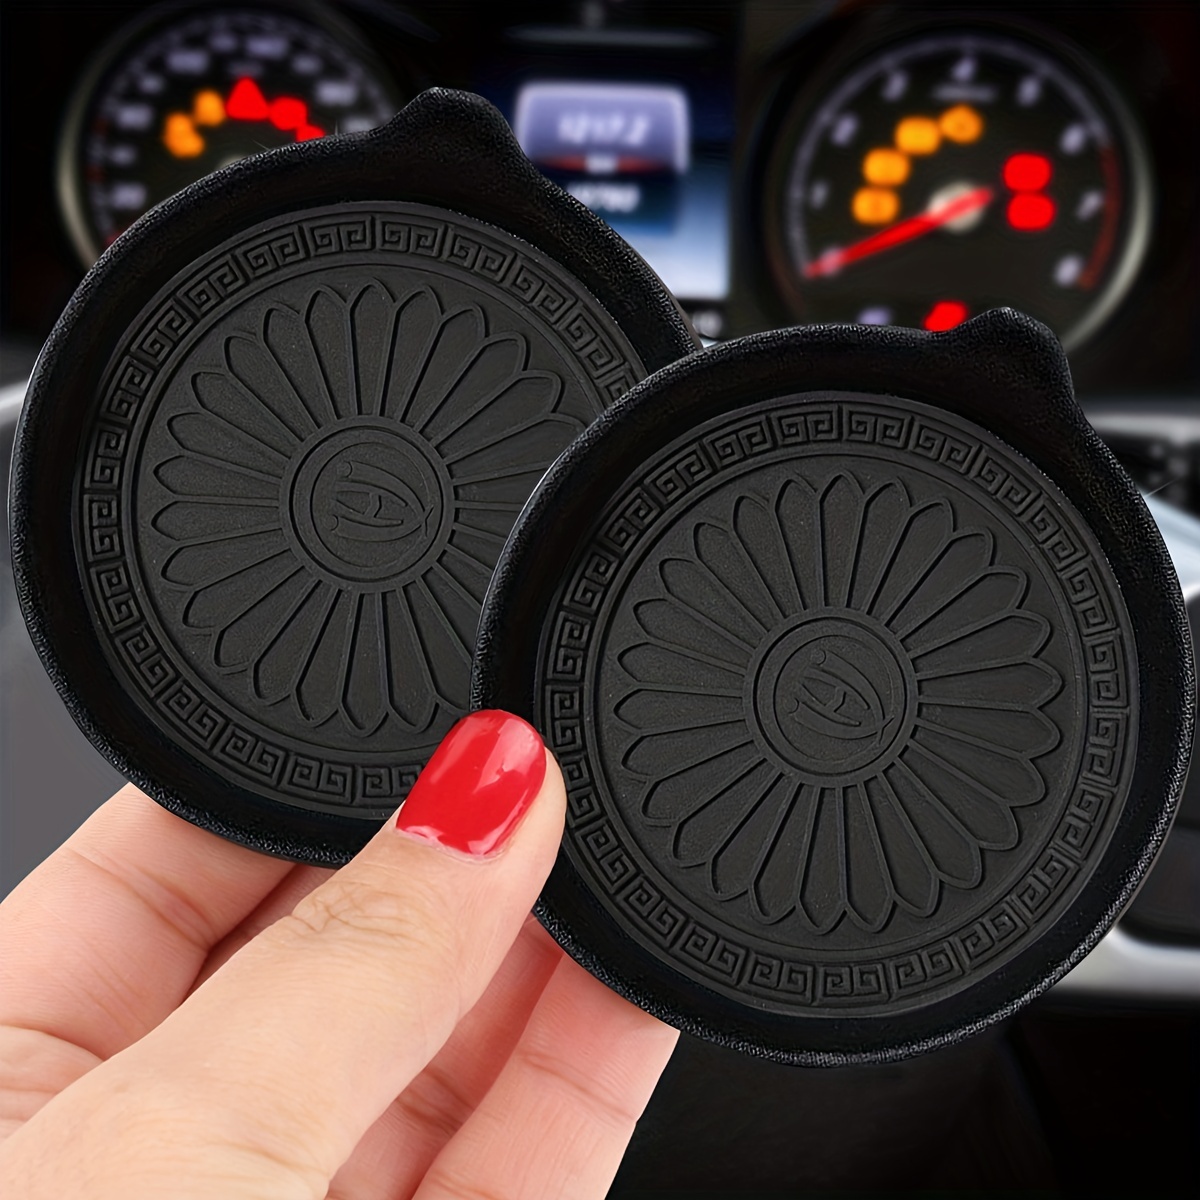 Retrok 4pcs/set Silicone Cup Coasters Auto Cup Holders Universal Car  Waterproof Non-Slip Sift-Proof Spill Holder Car Interior Accessories  (Black) 